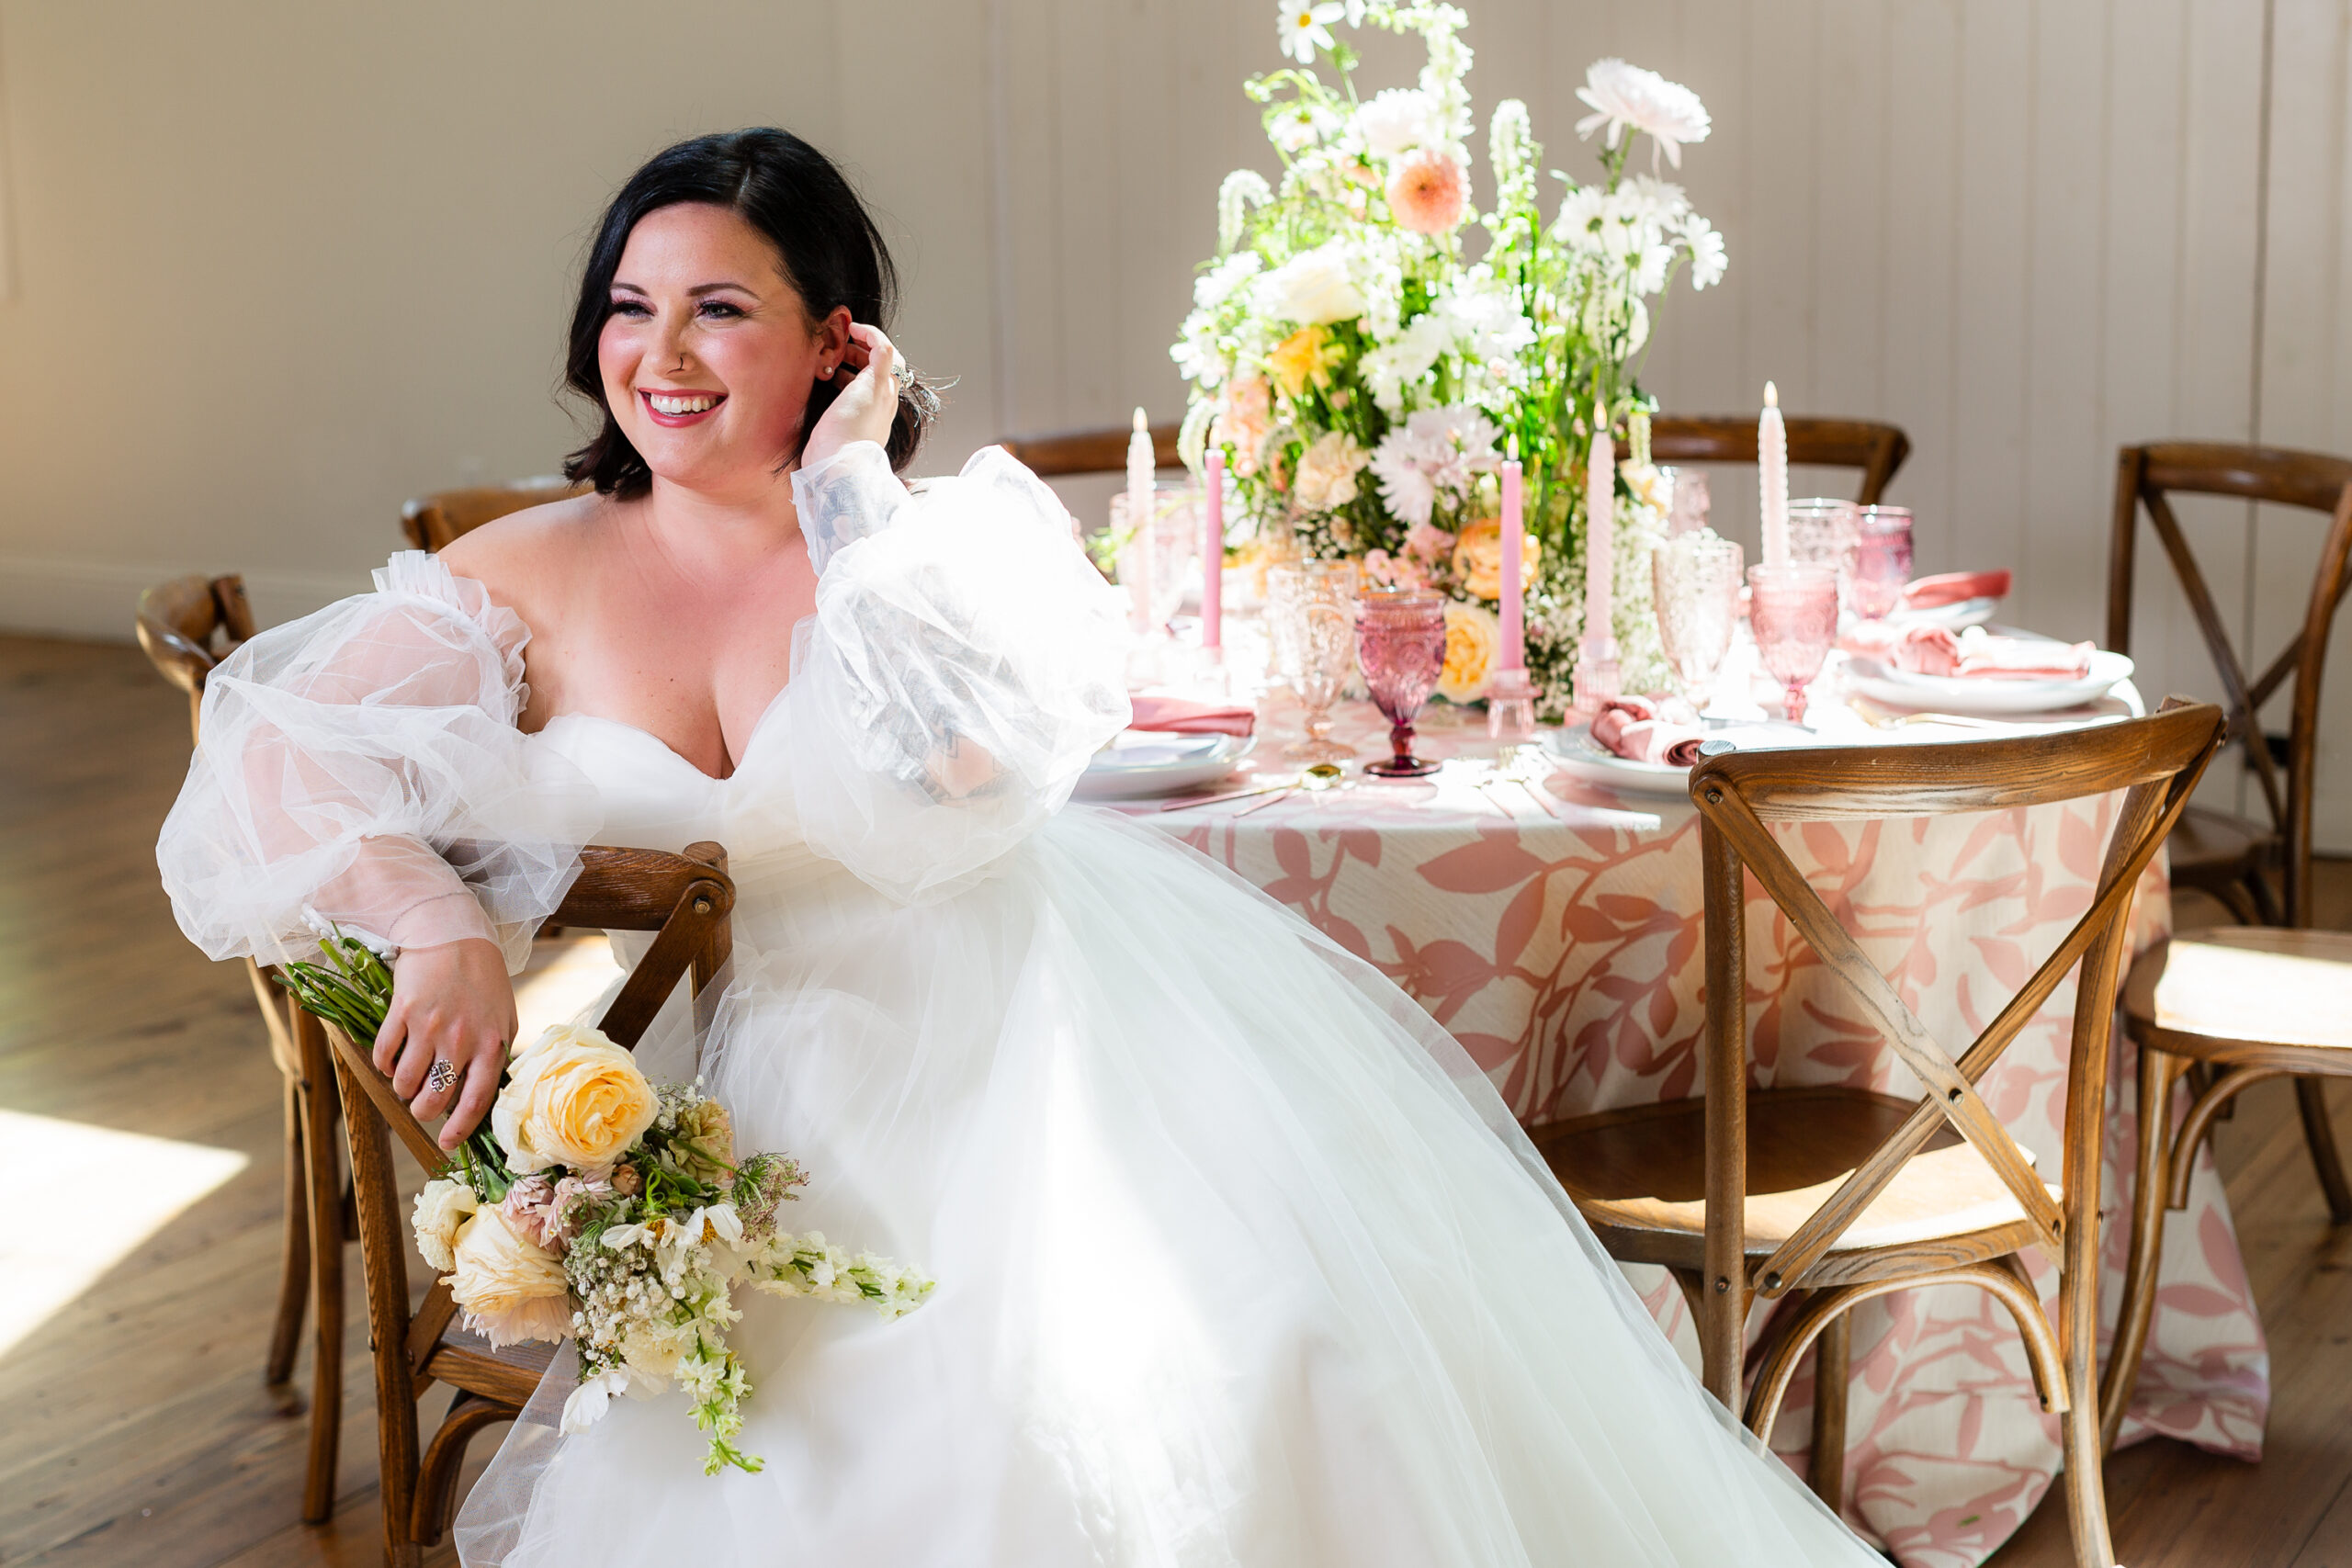 Dallas wedding photographer captures bride sitting on chair looking across room